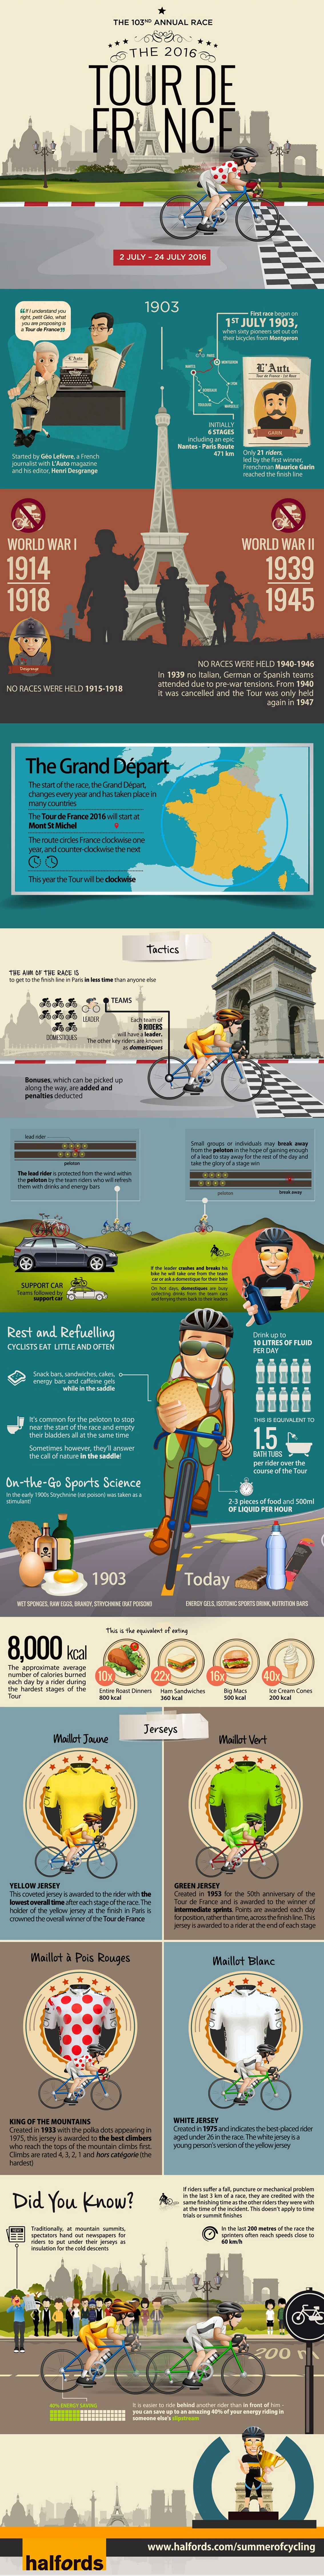 Guide to the 2016 Tour de France - Cycling Infographic